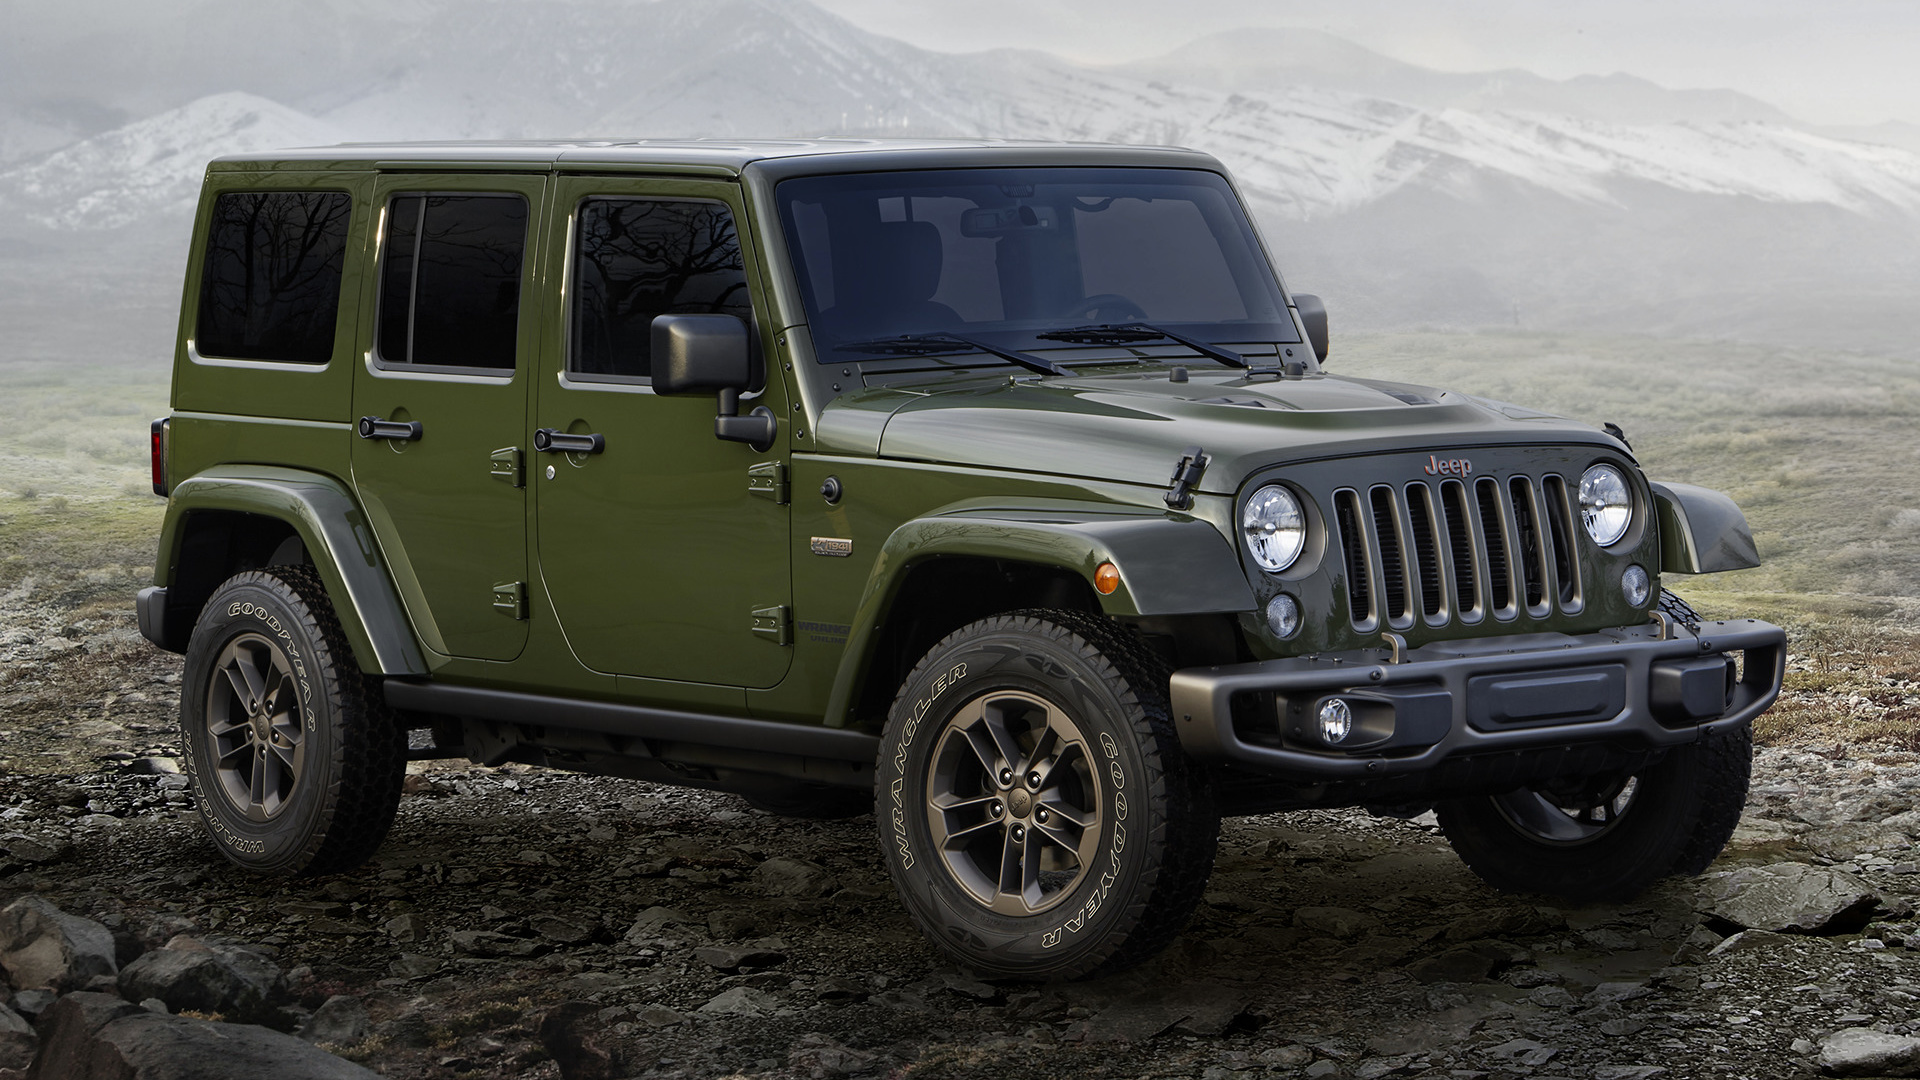 2016 Jeep Wrangler Unlimited 75th Anniversary Hd Wallpaper Background Image 1920x1080